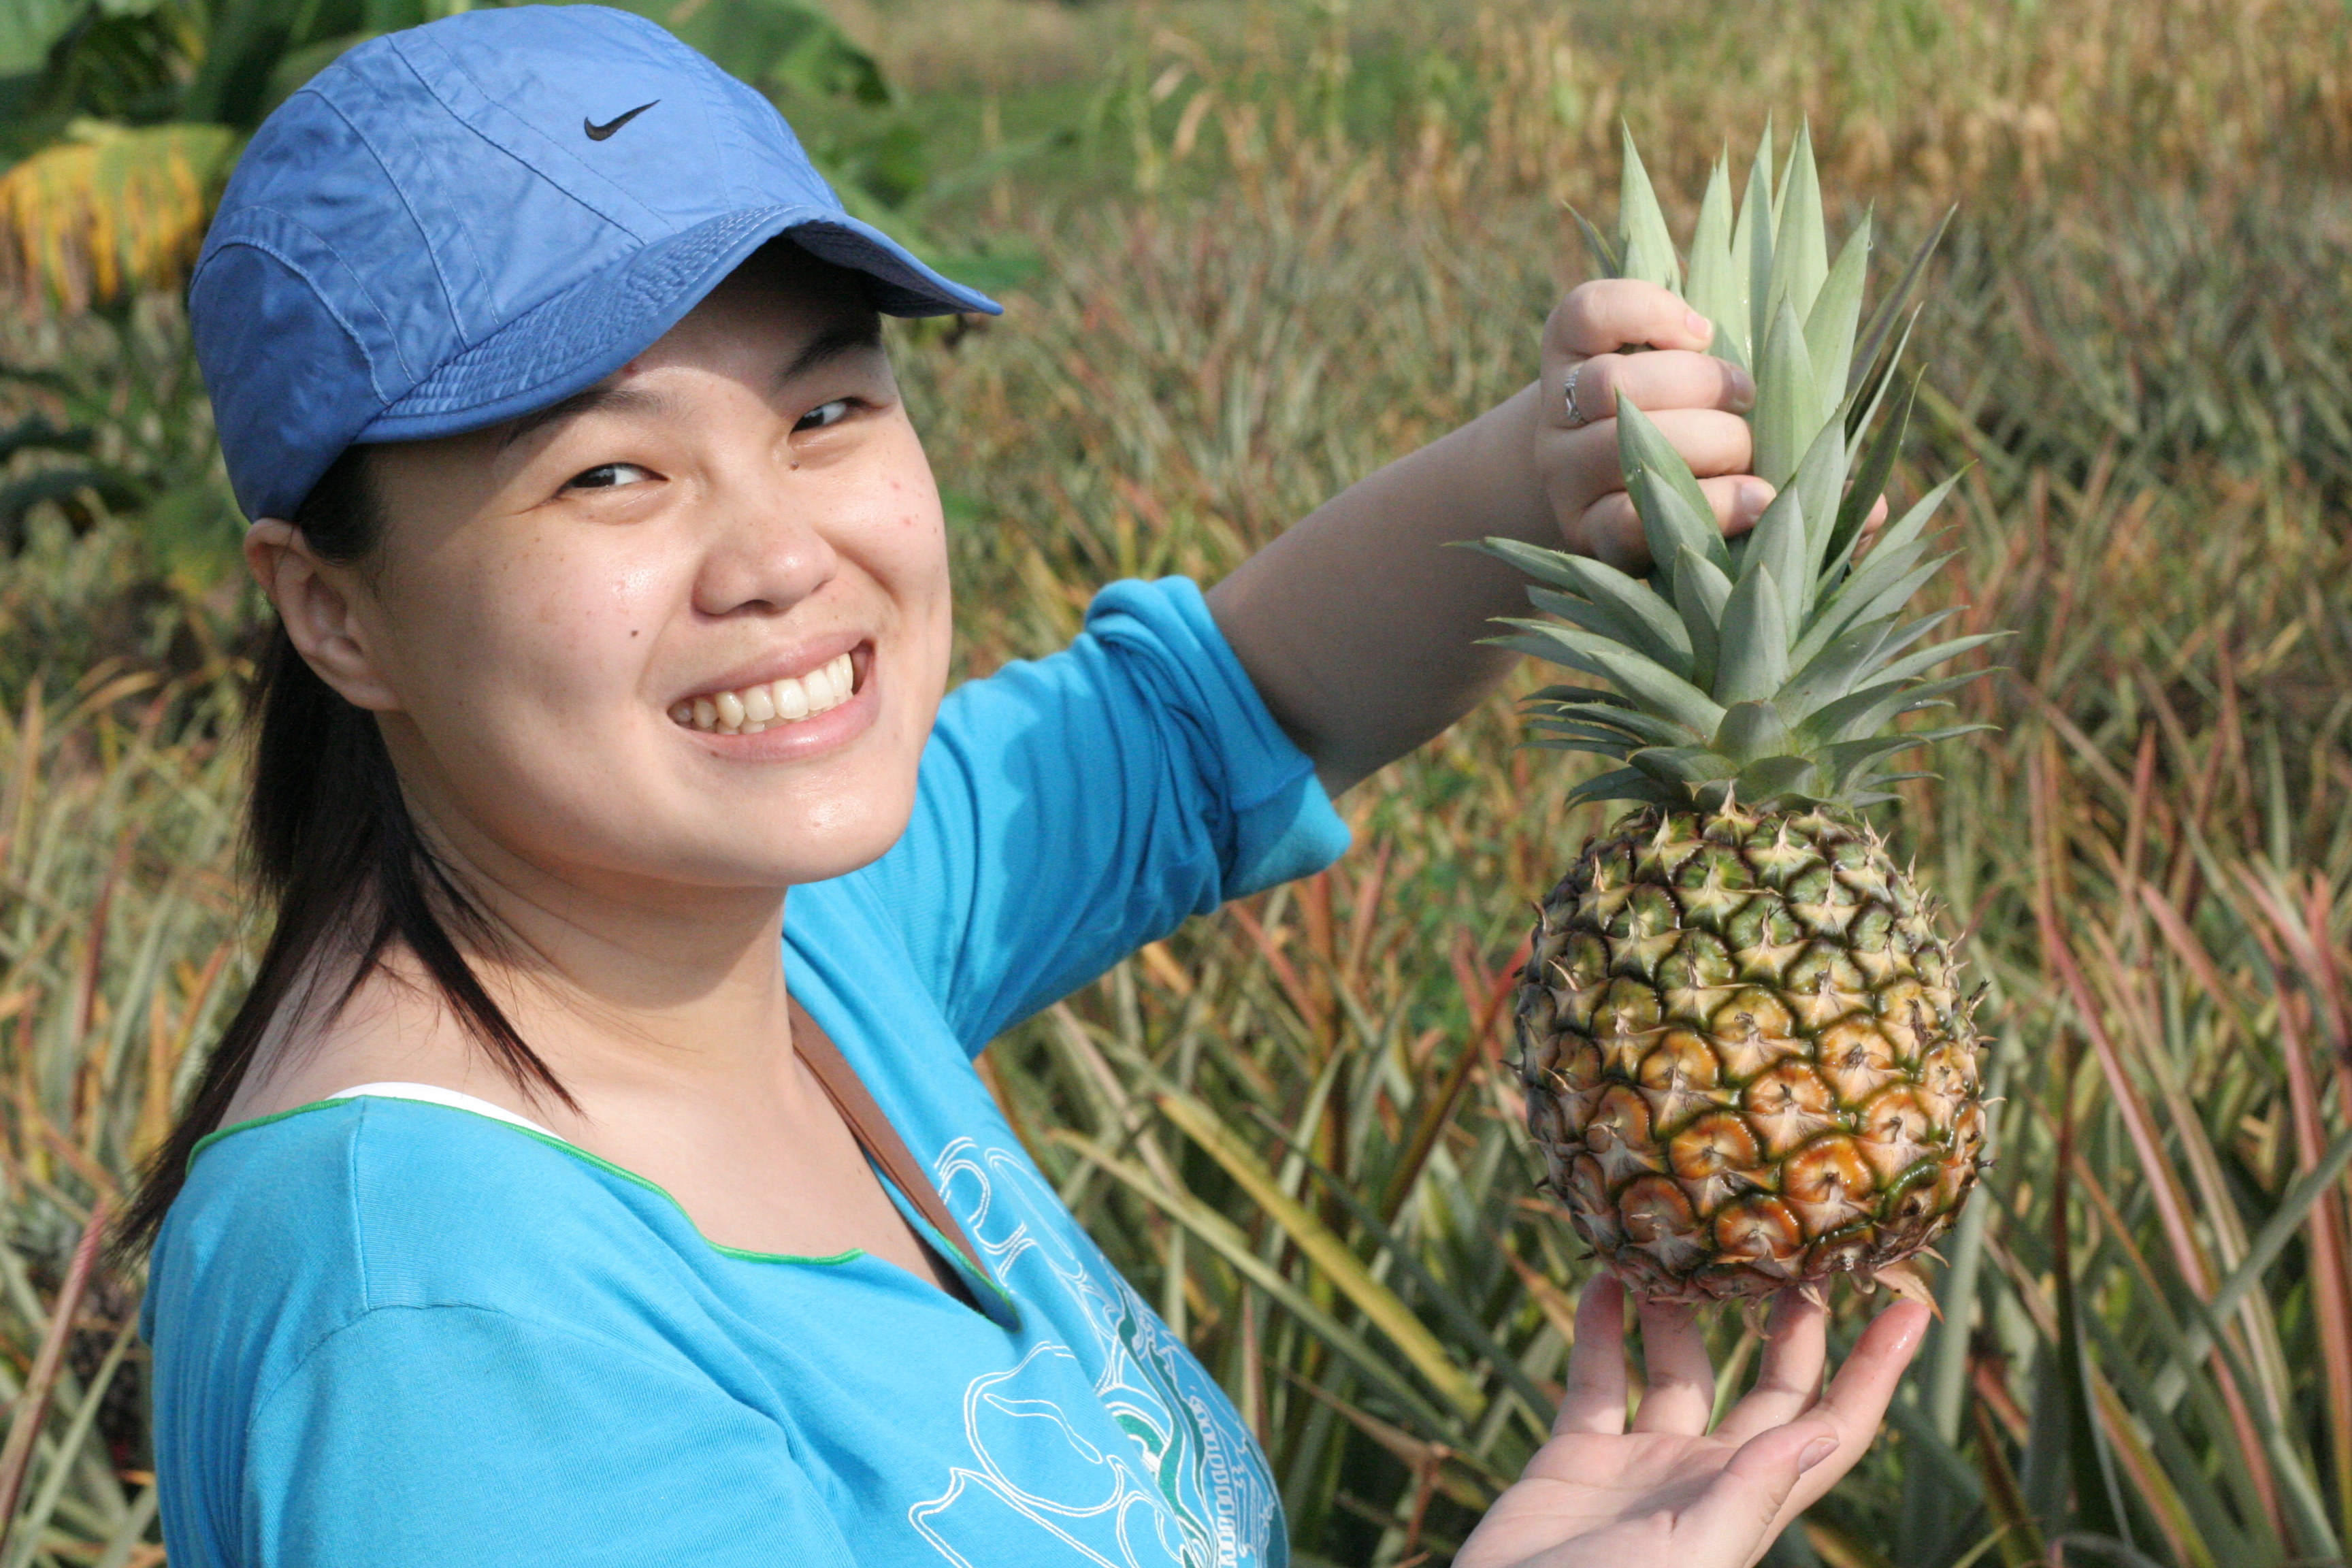 Woman smiling holding a pineapple